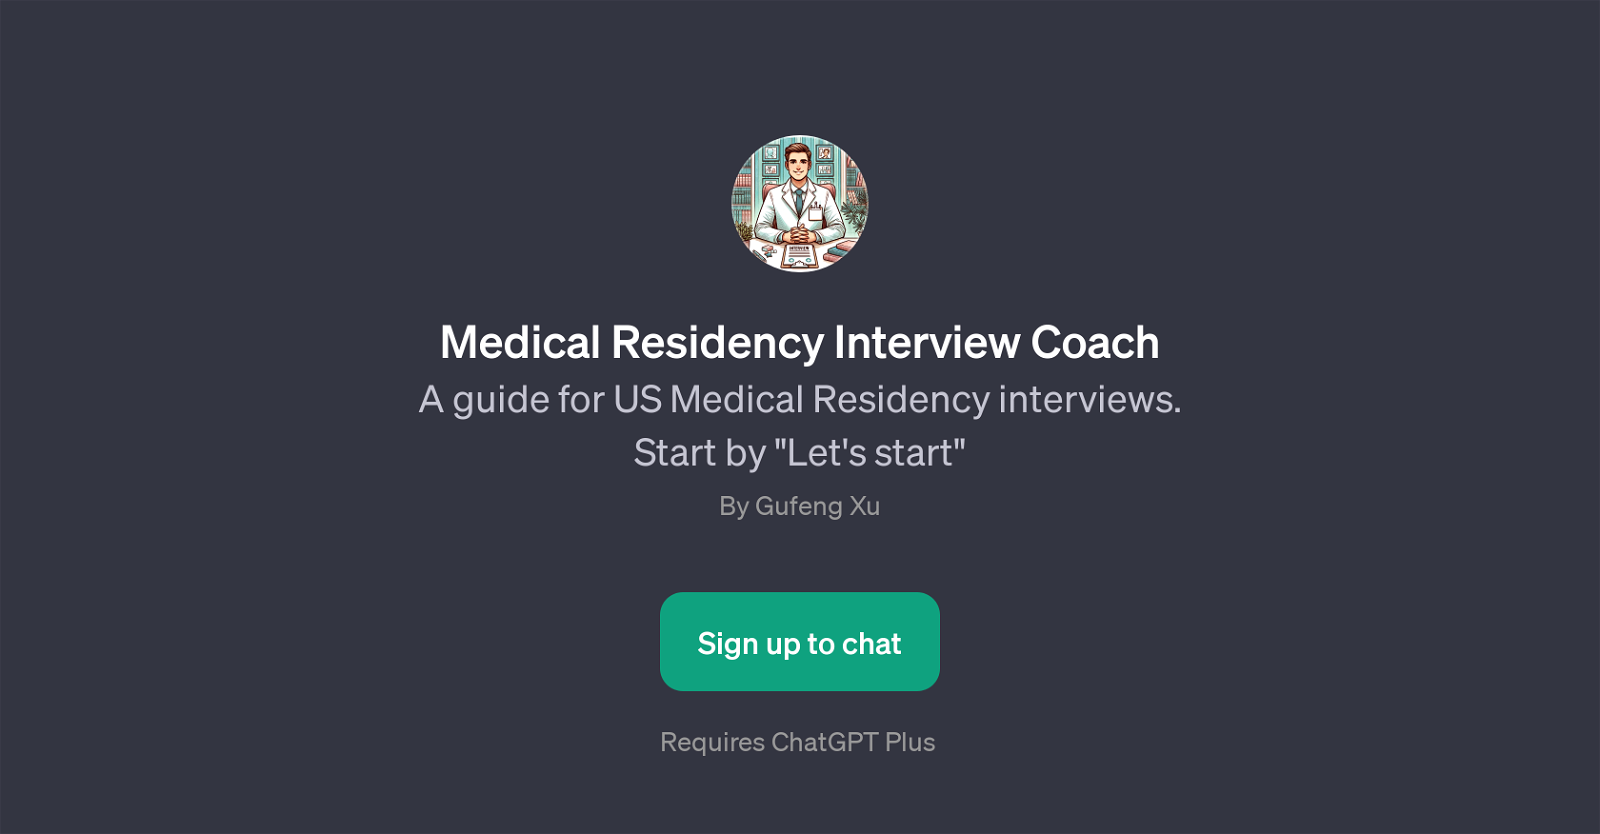 Medical Residency Interview Coach website